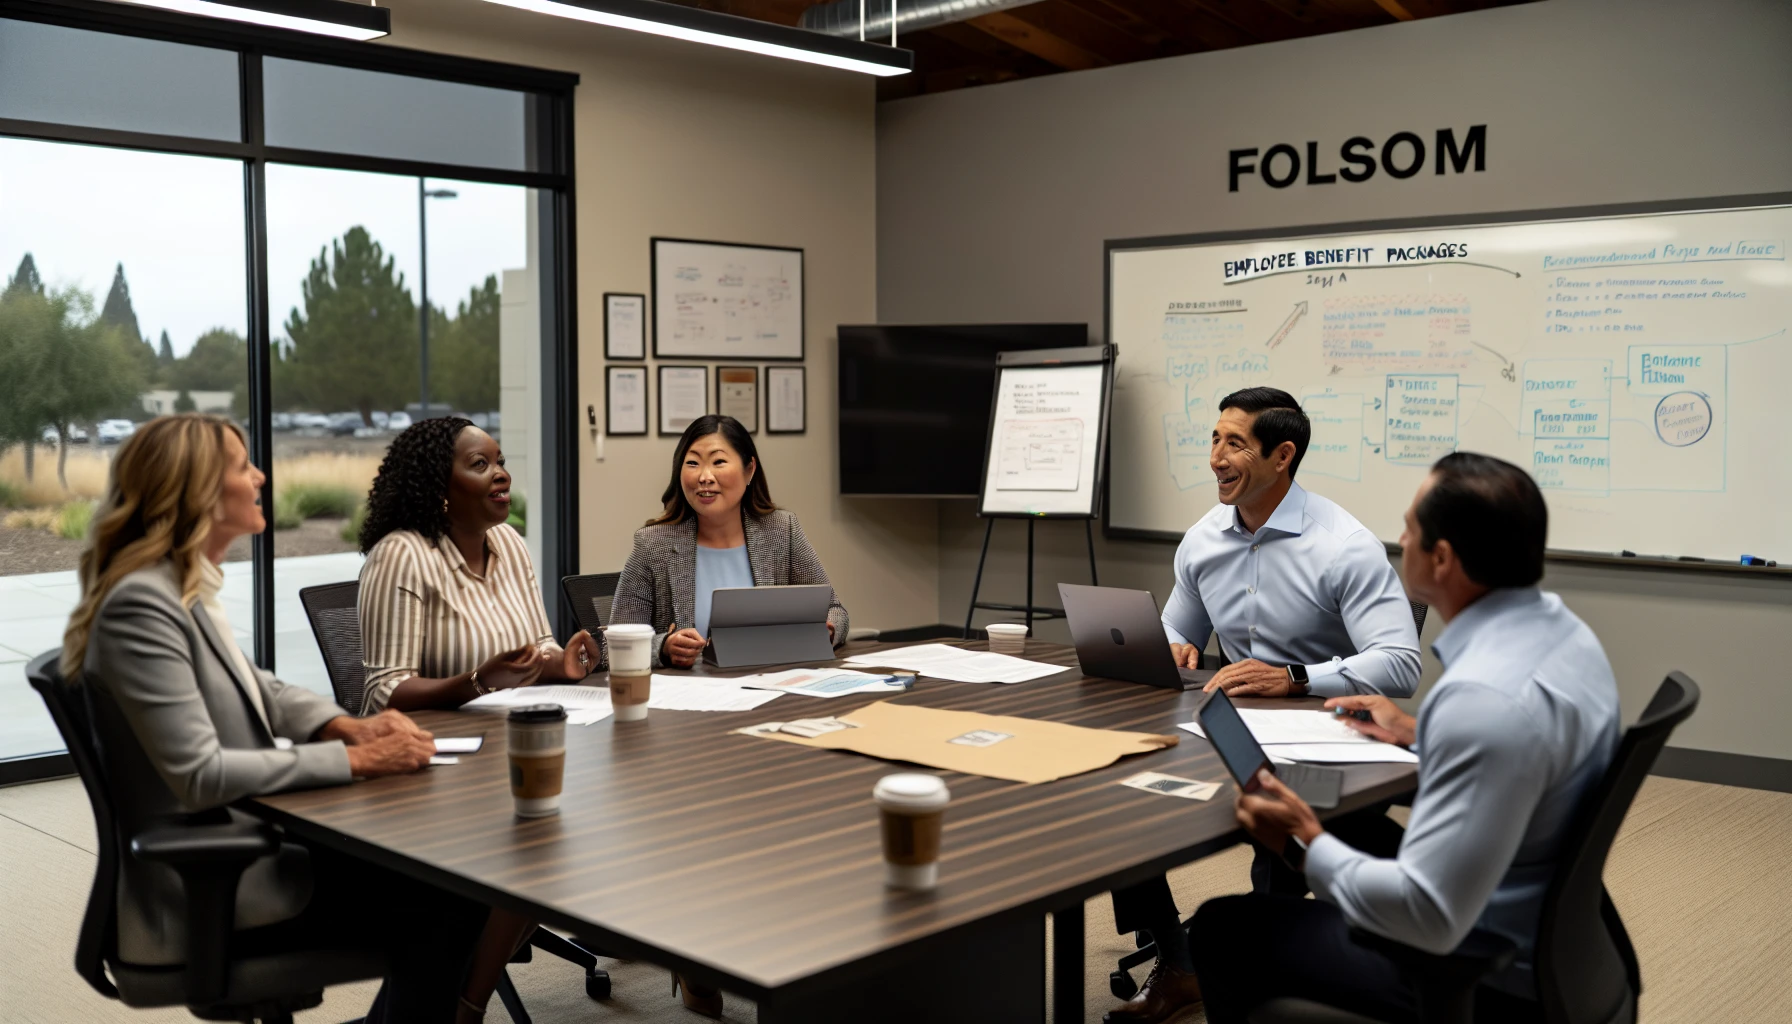 A diverse group of employees discussing employee benefit packages in Folsom, CA